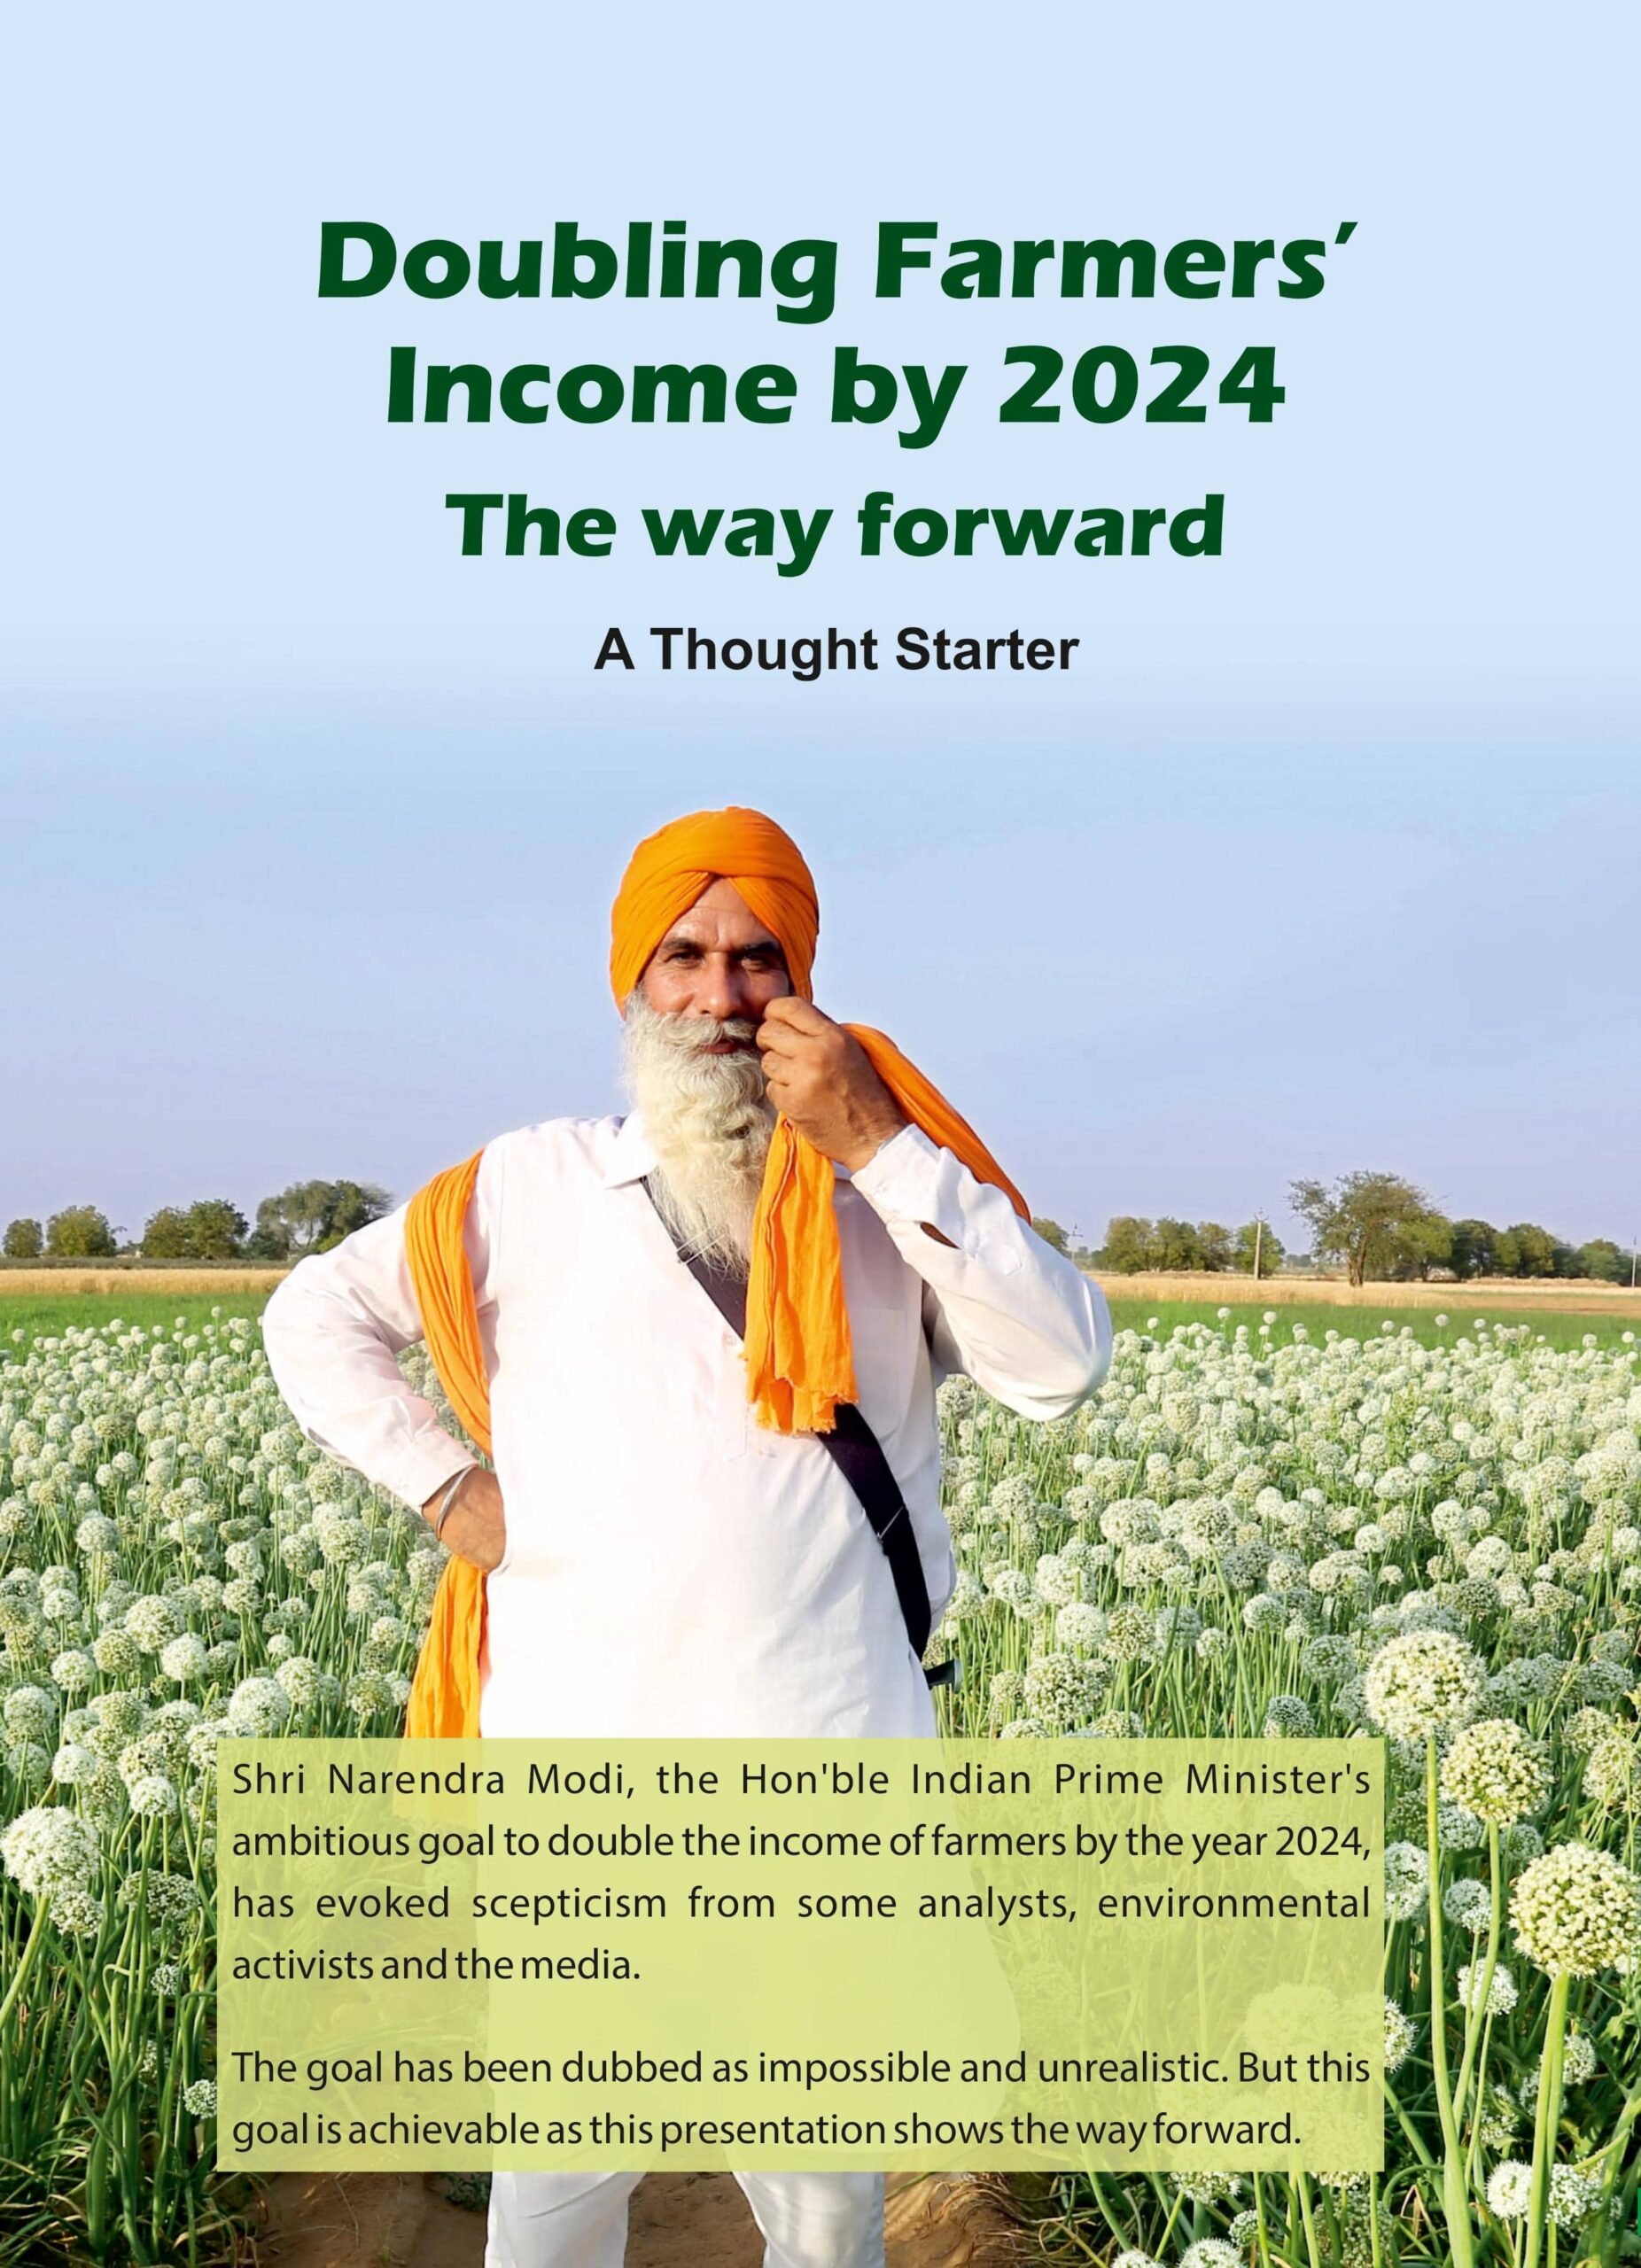 Doubling farmers income